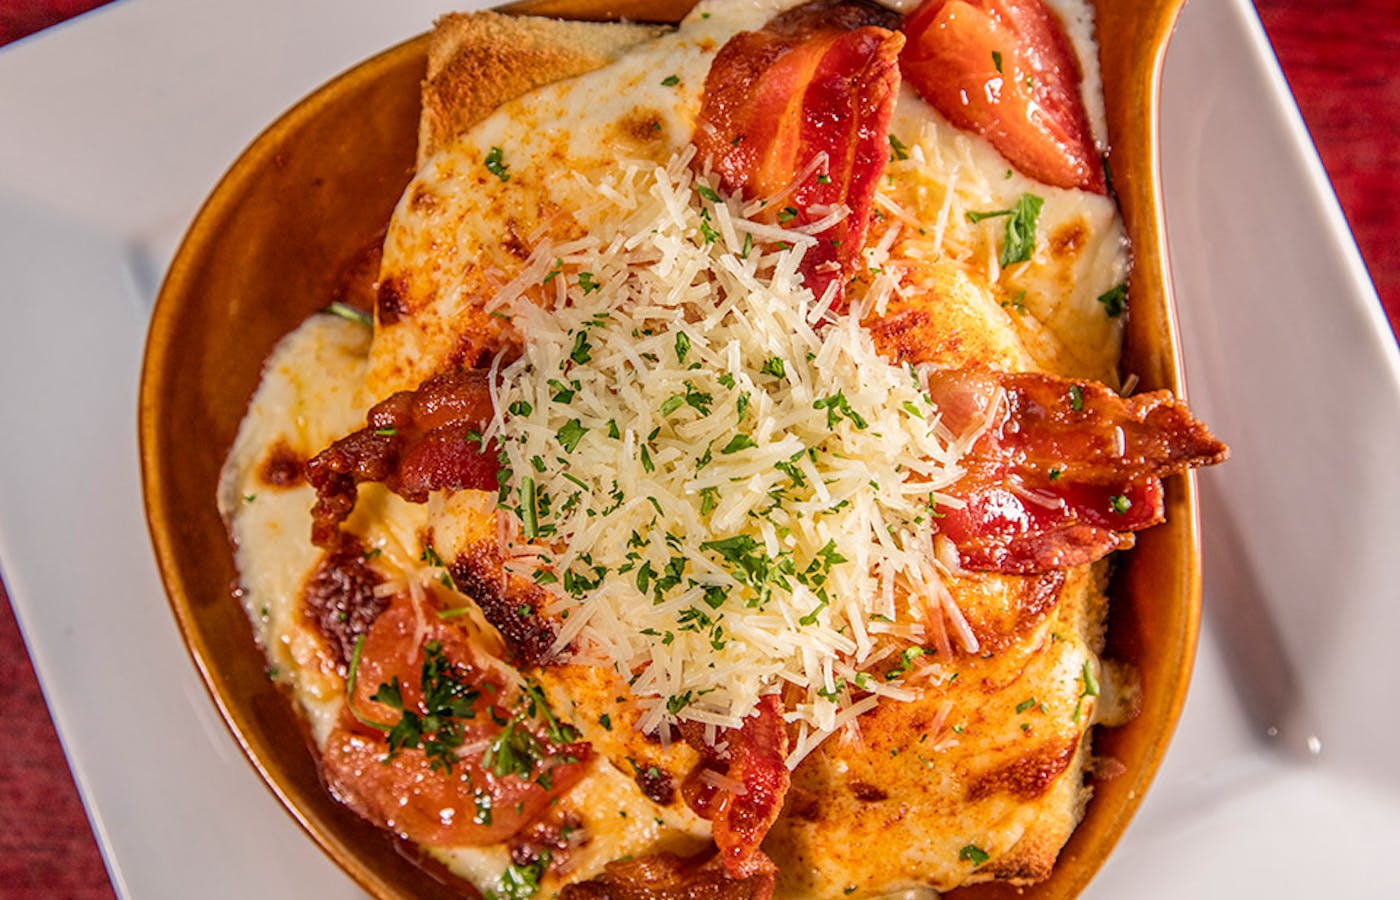 The Hot Brown at The Brown Hotel in Louisville, Kentucky (photo by Chris Witzke)